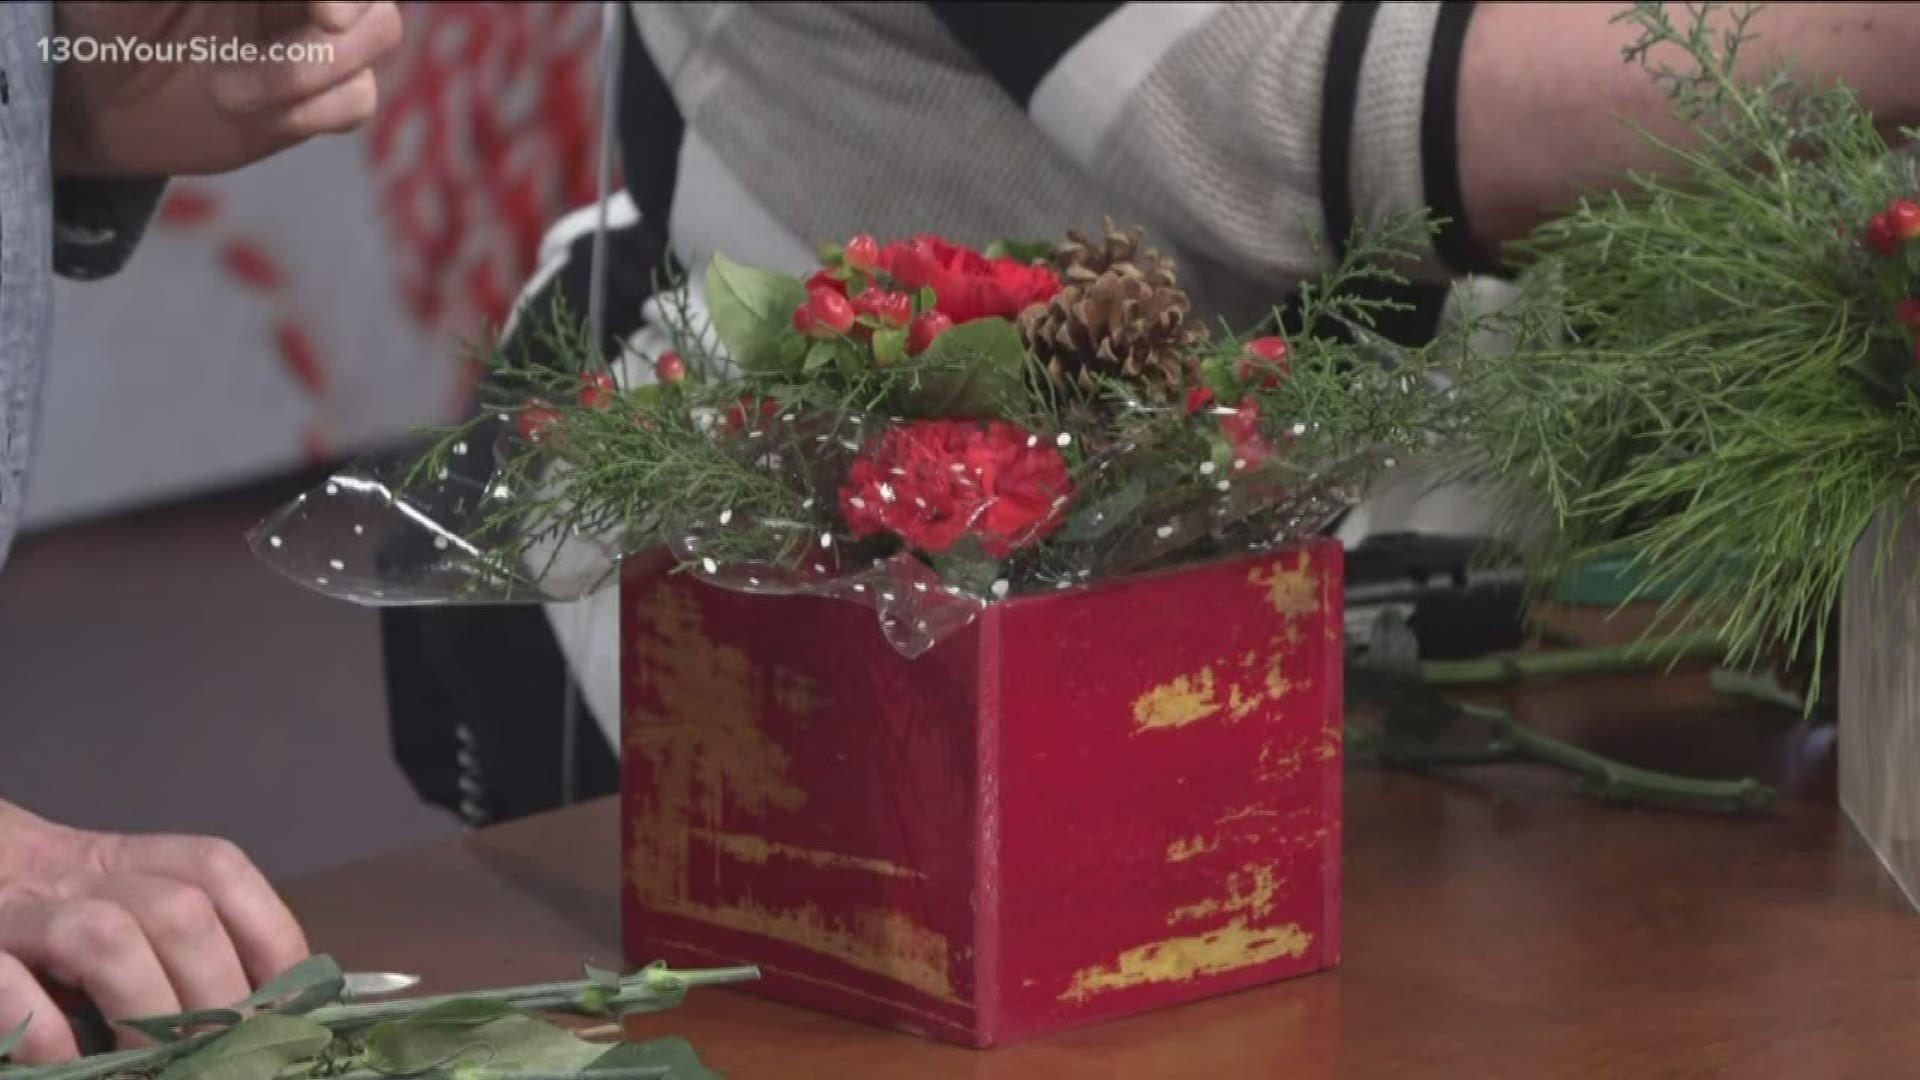 Christmas Floral Centerpieces: Tips for creating beautiful holiday